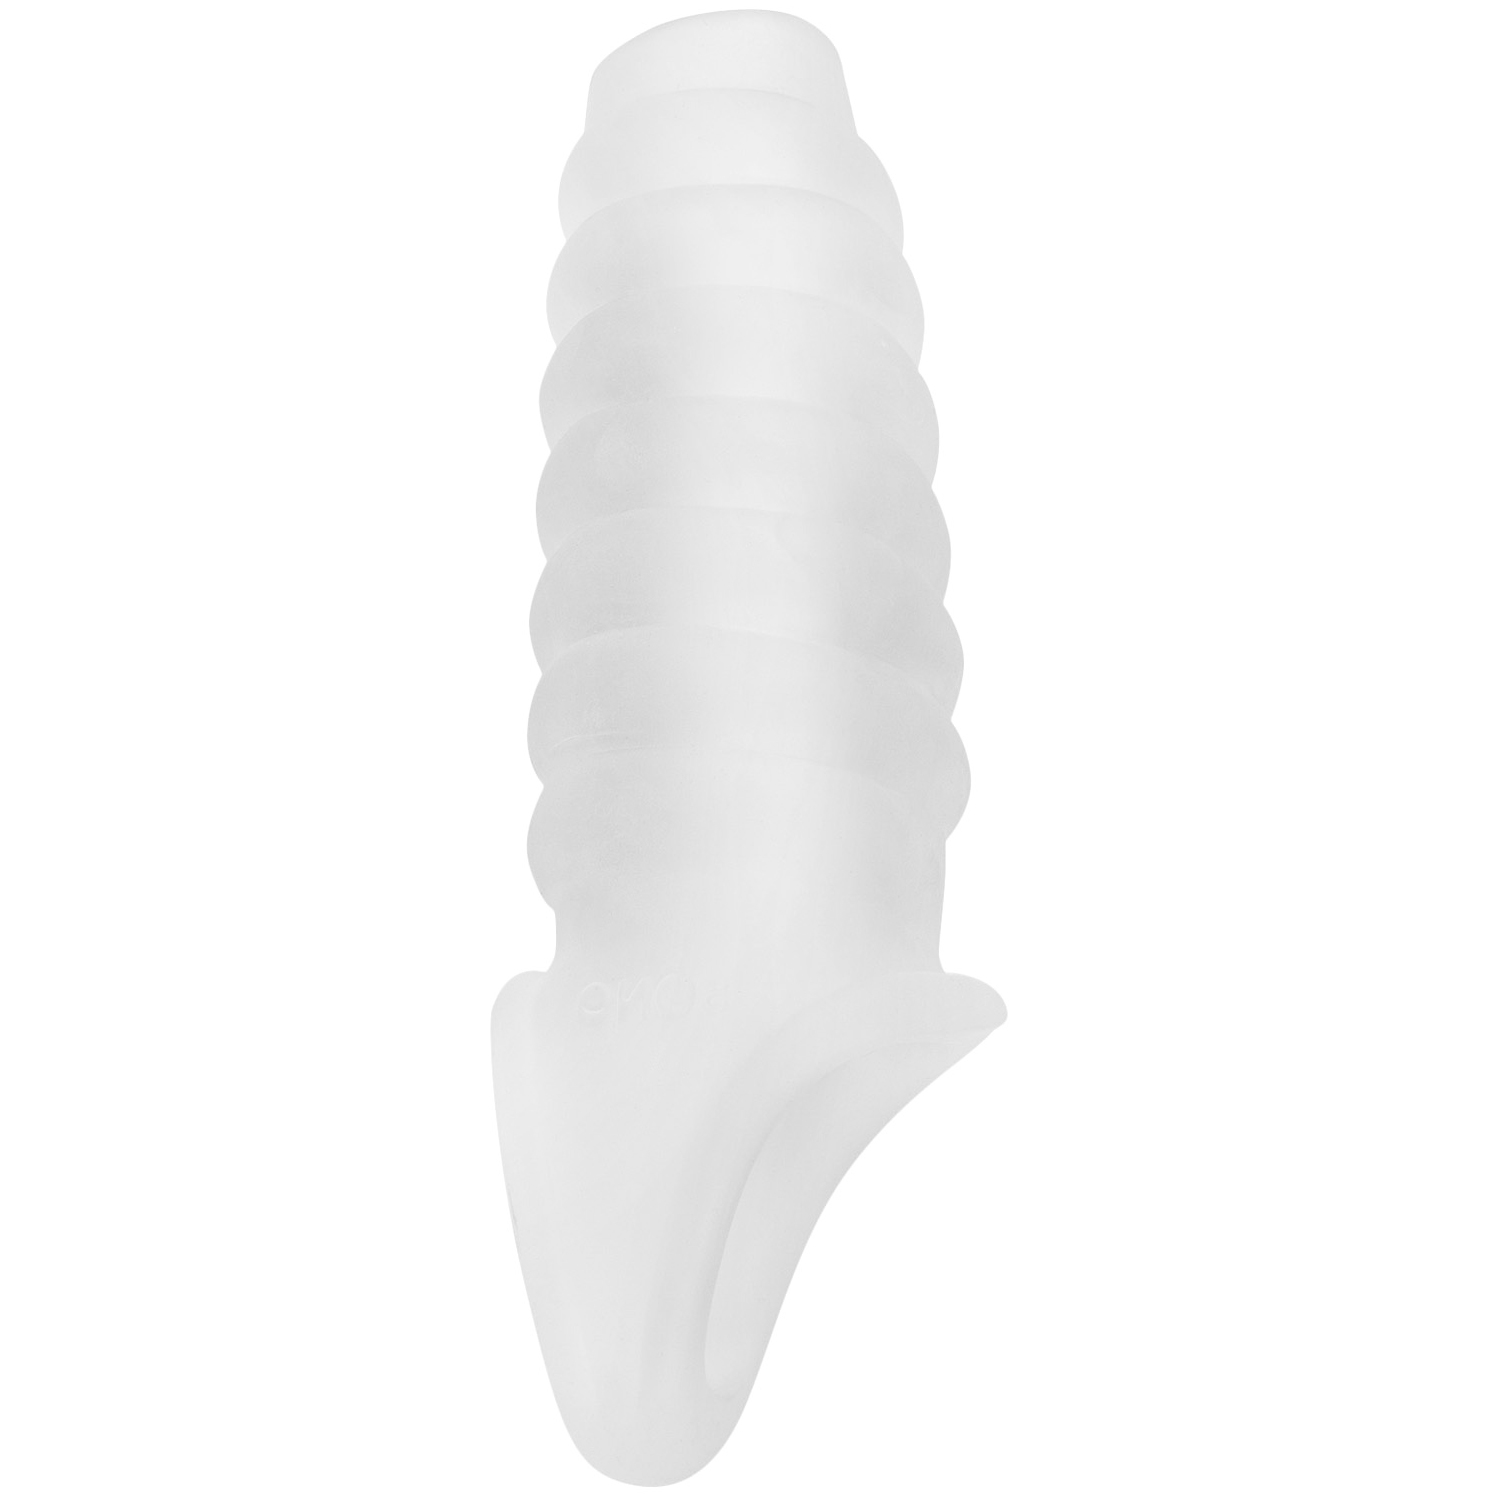 SONO 21 Dong Extension Penis Sleeve-Clear thumbnail